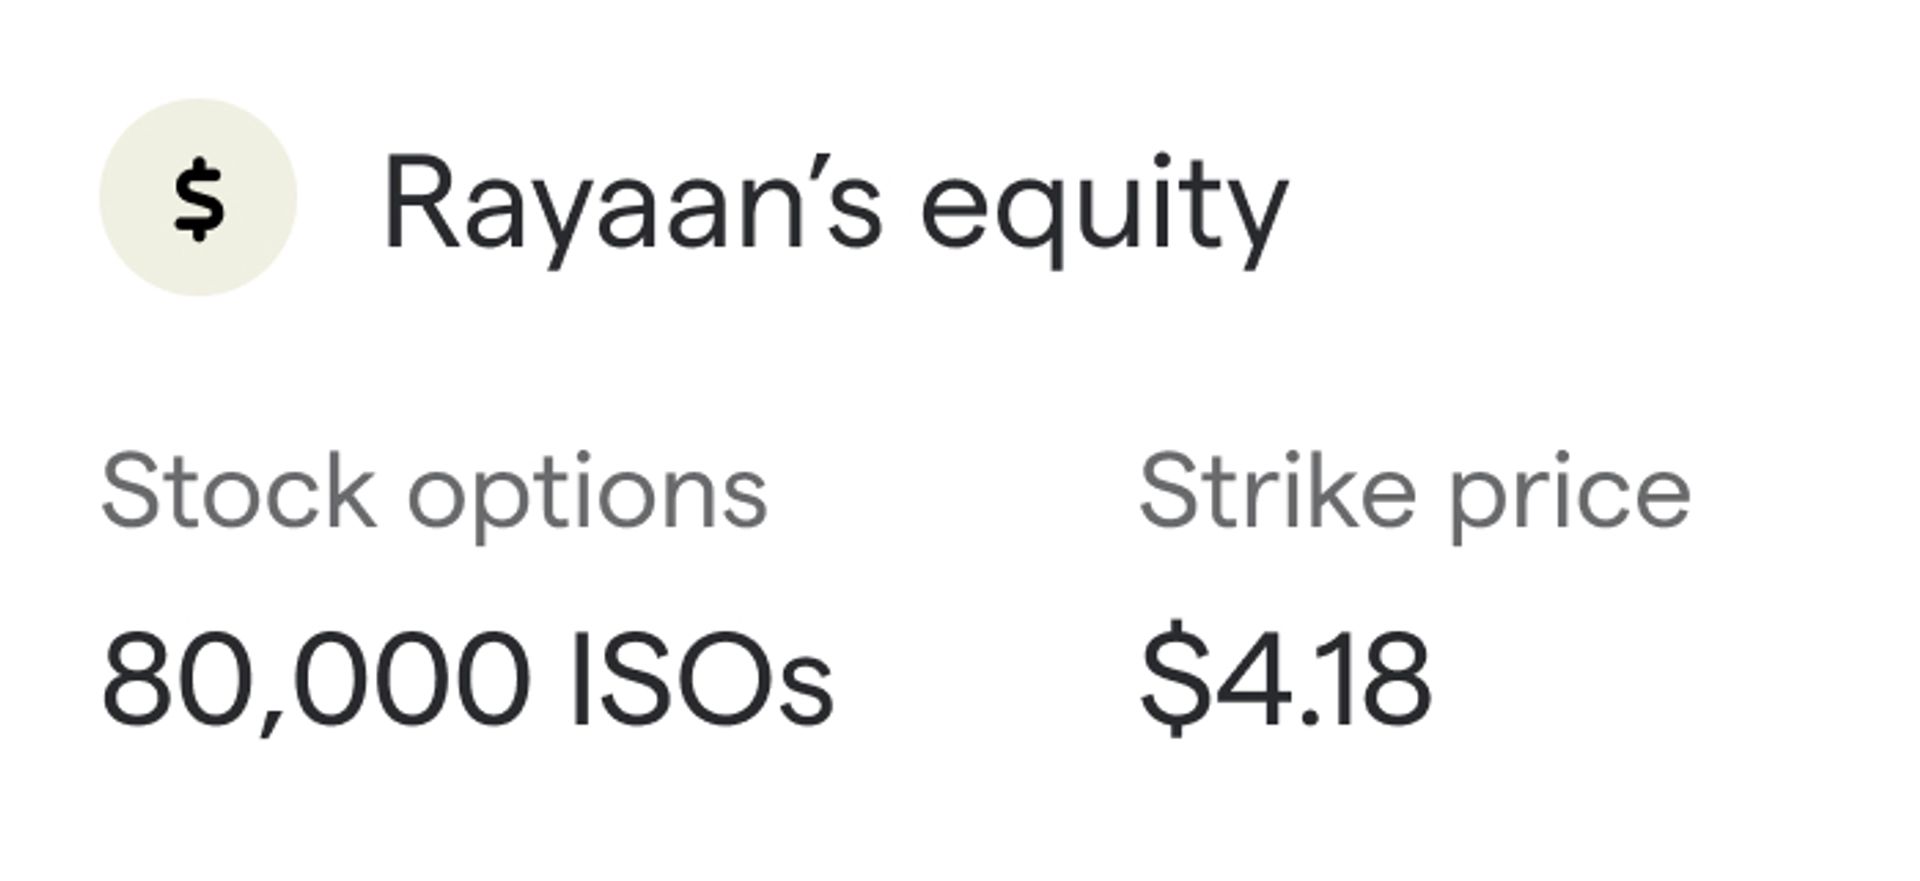 Rayaan has 80,000 incentive stock options for a strike price of $4.18